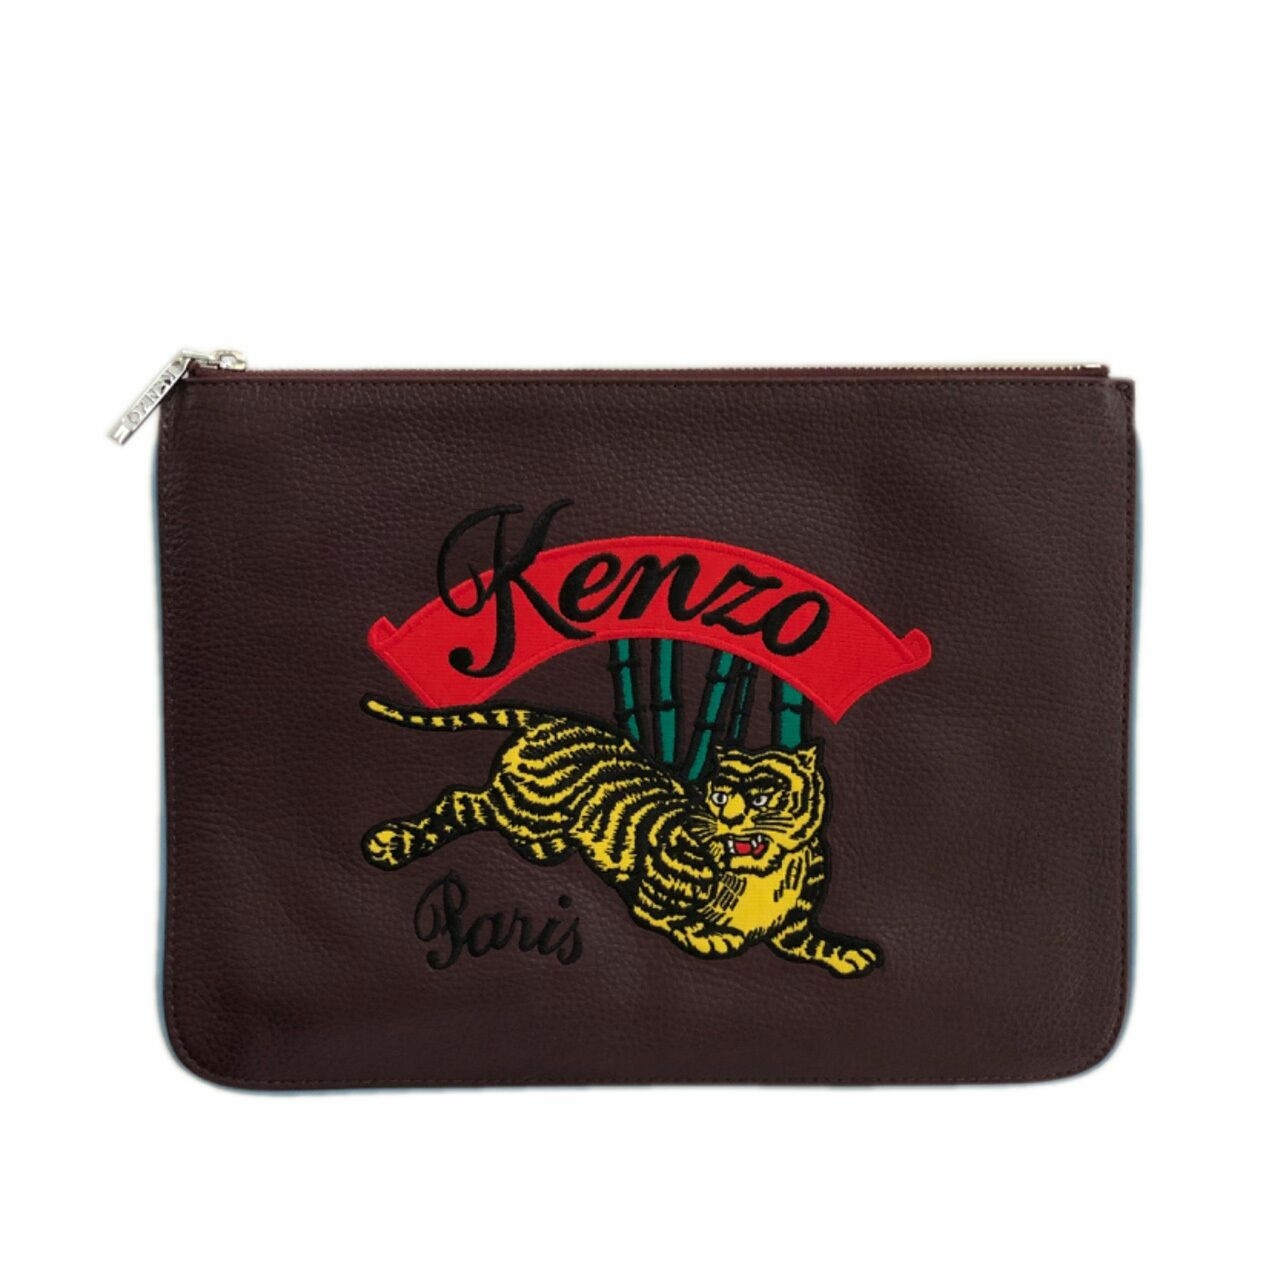 Kenzo Brown Jumping Tiger Clutch